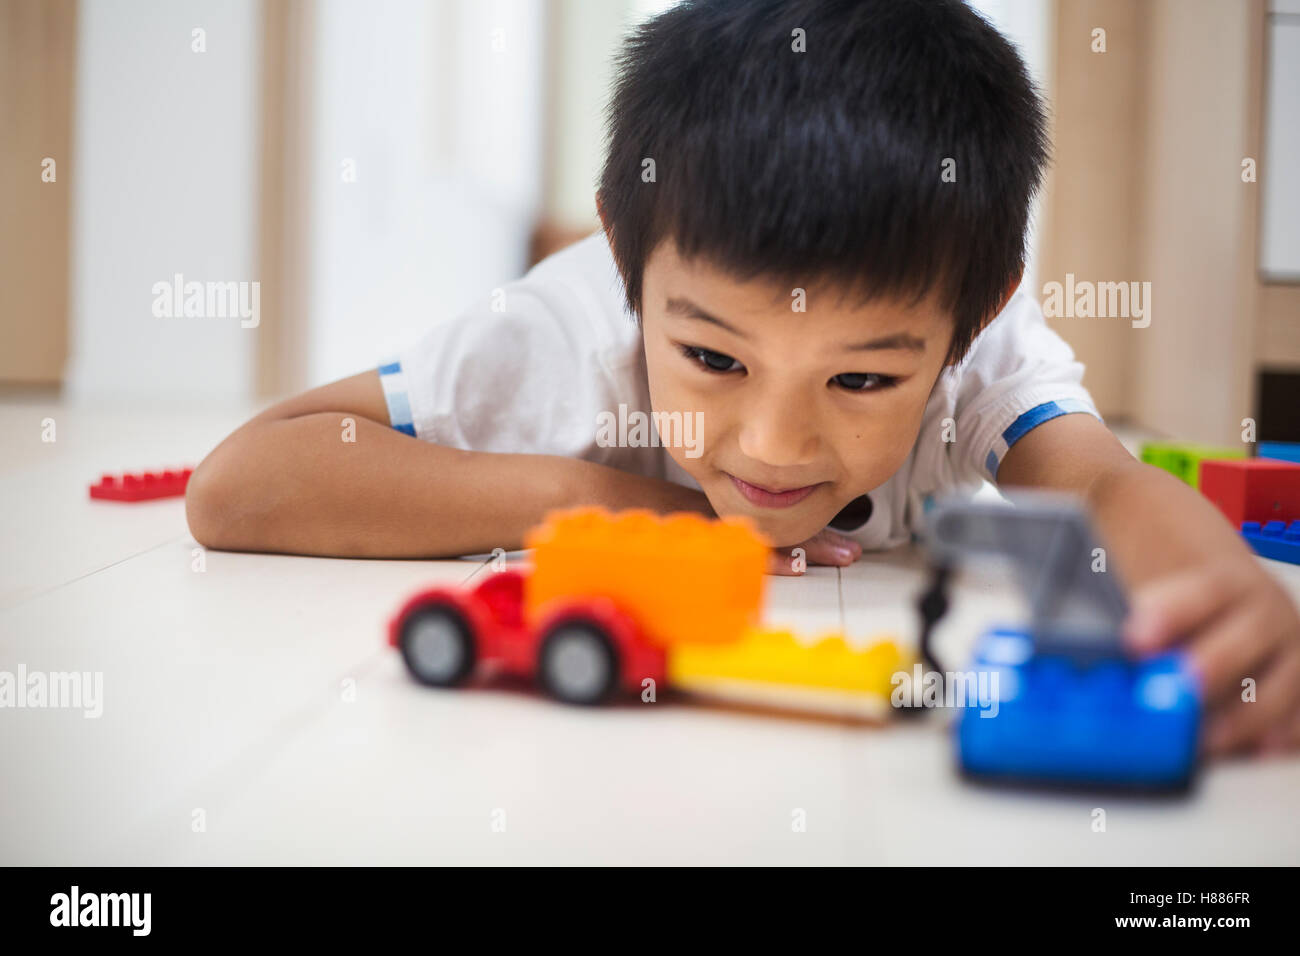 Family home. A boy playing with cars on the floor. Stock Photo